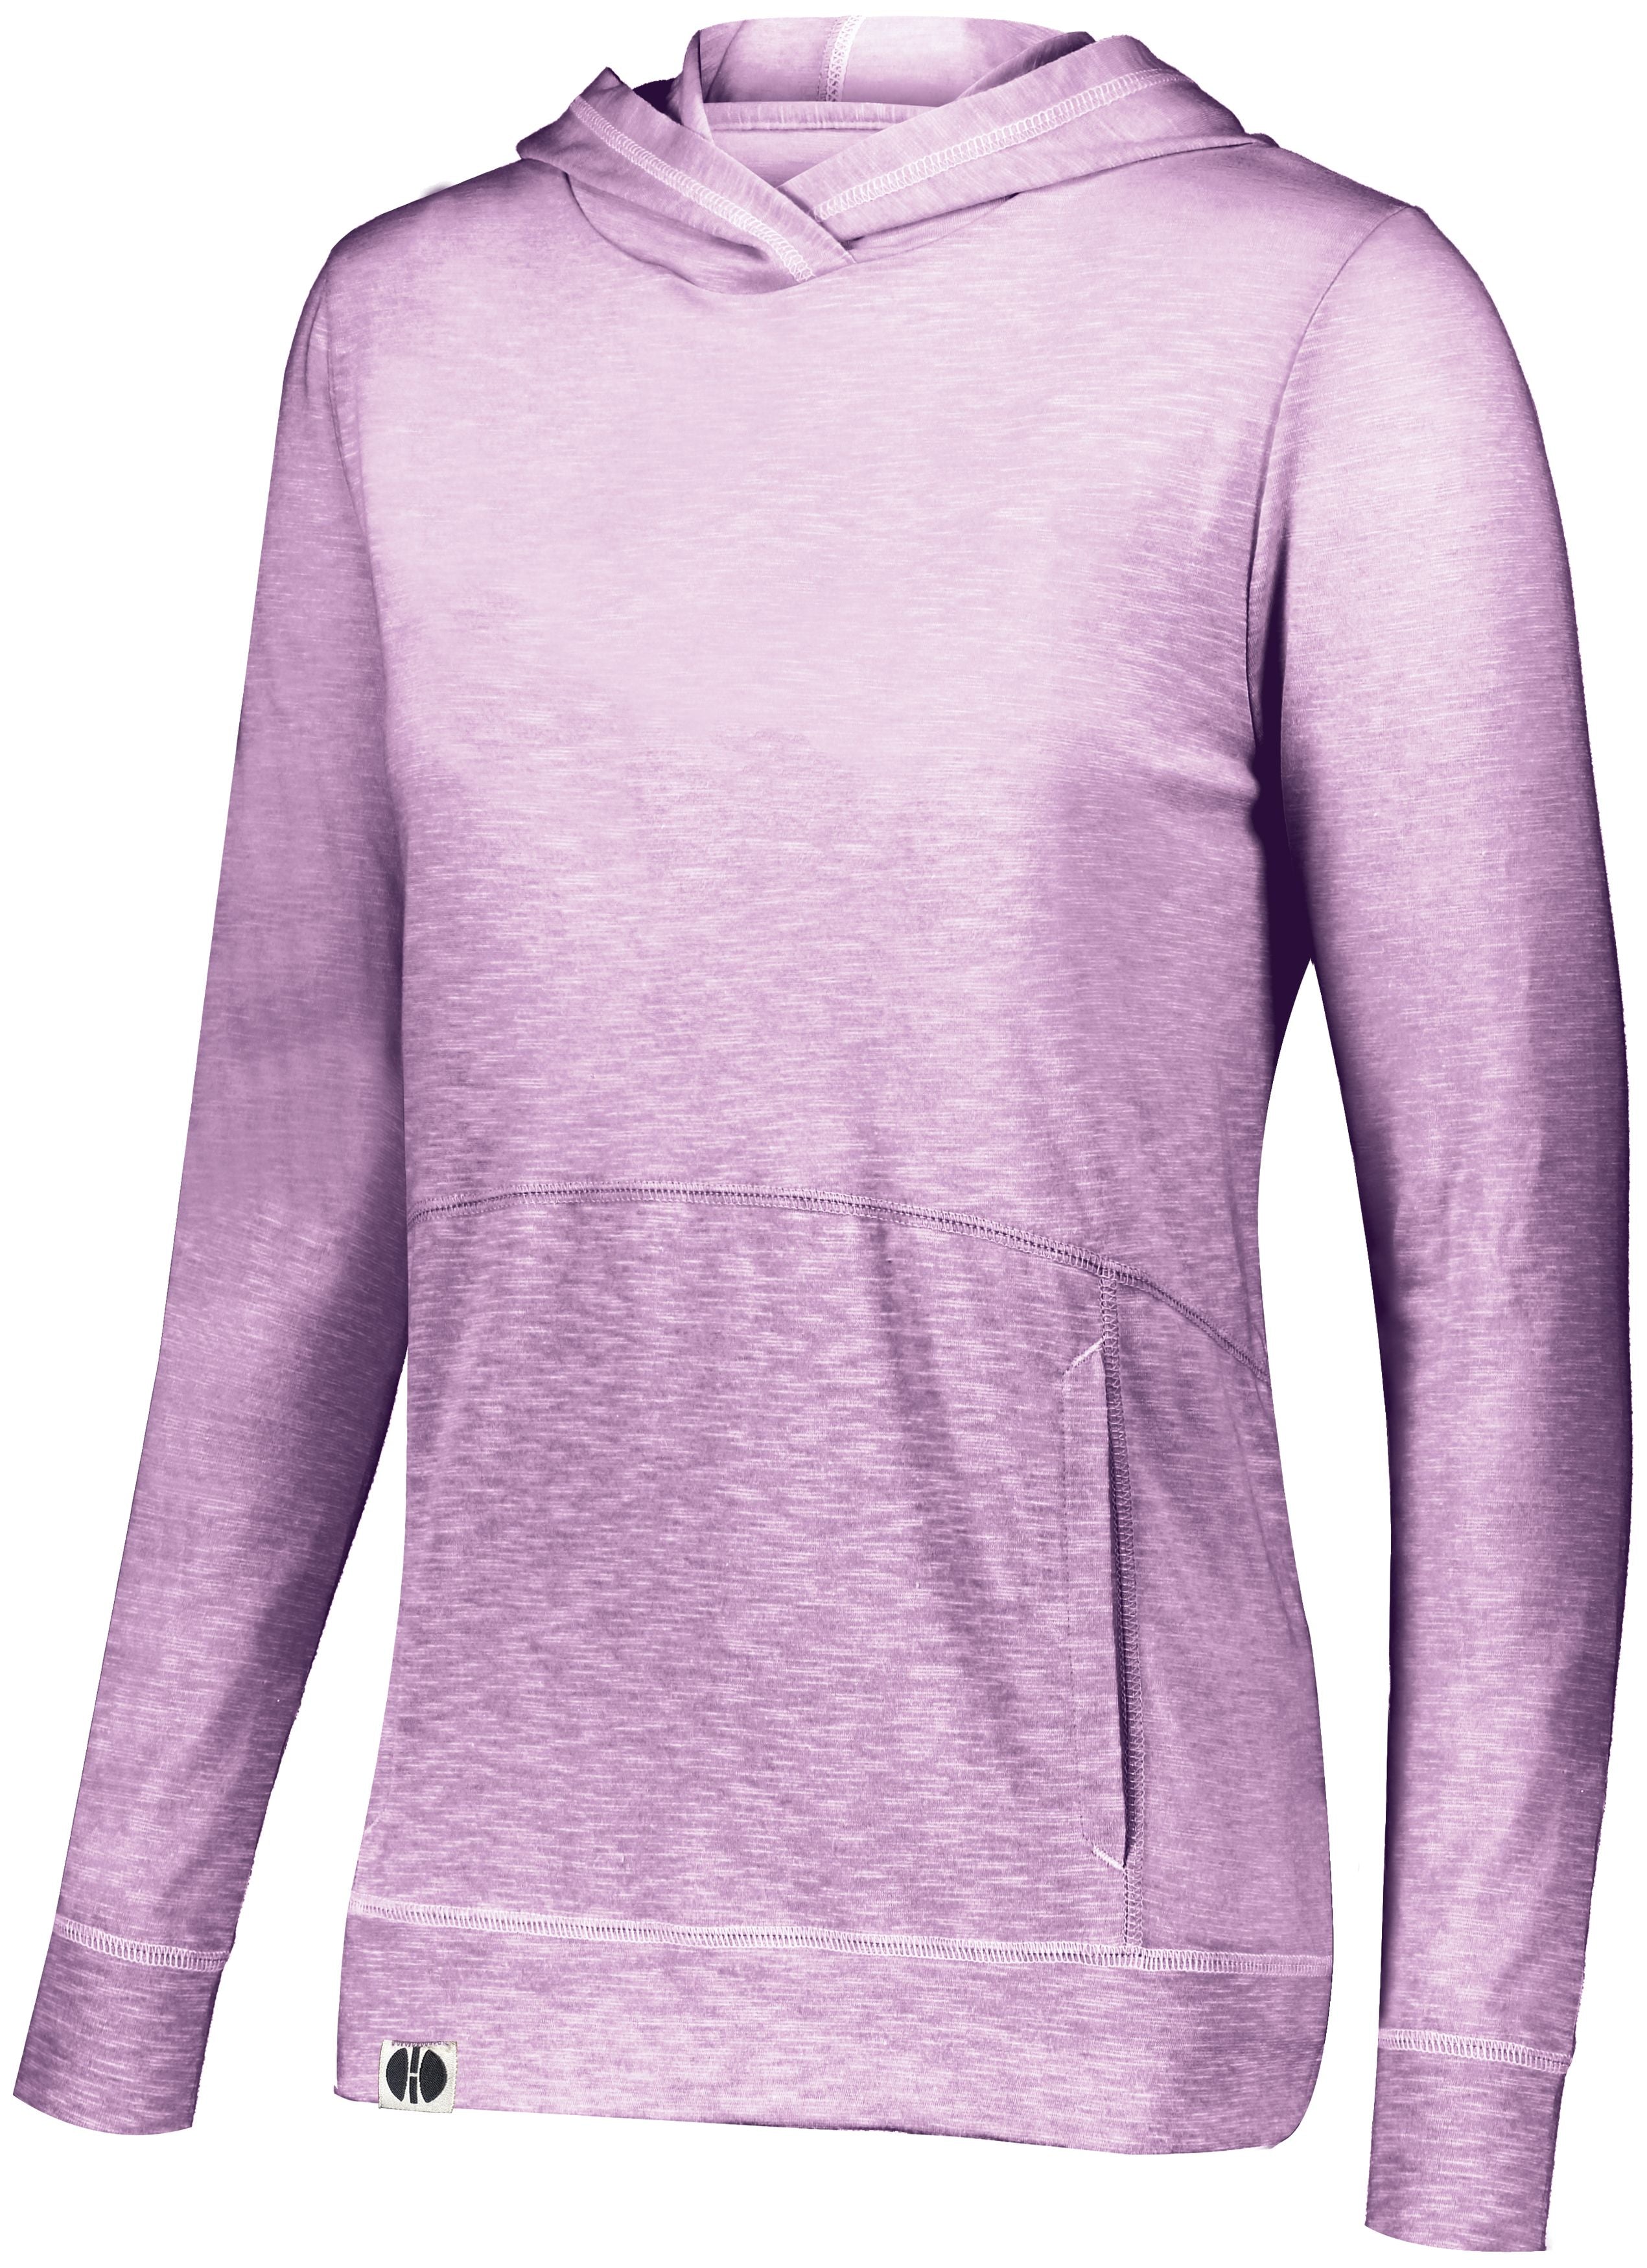 Holloway Ladies Journey Hoodie in Light Lavender  -Part of the Ladies, Ladies-Hoodie, Hoodies, Holloway product lines at KanaleyCreations.com